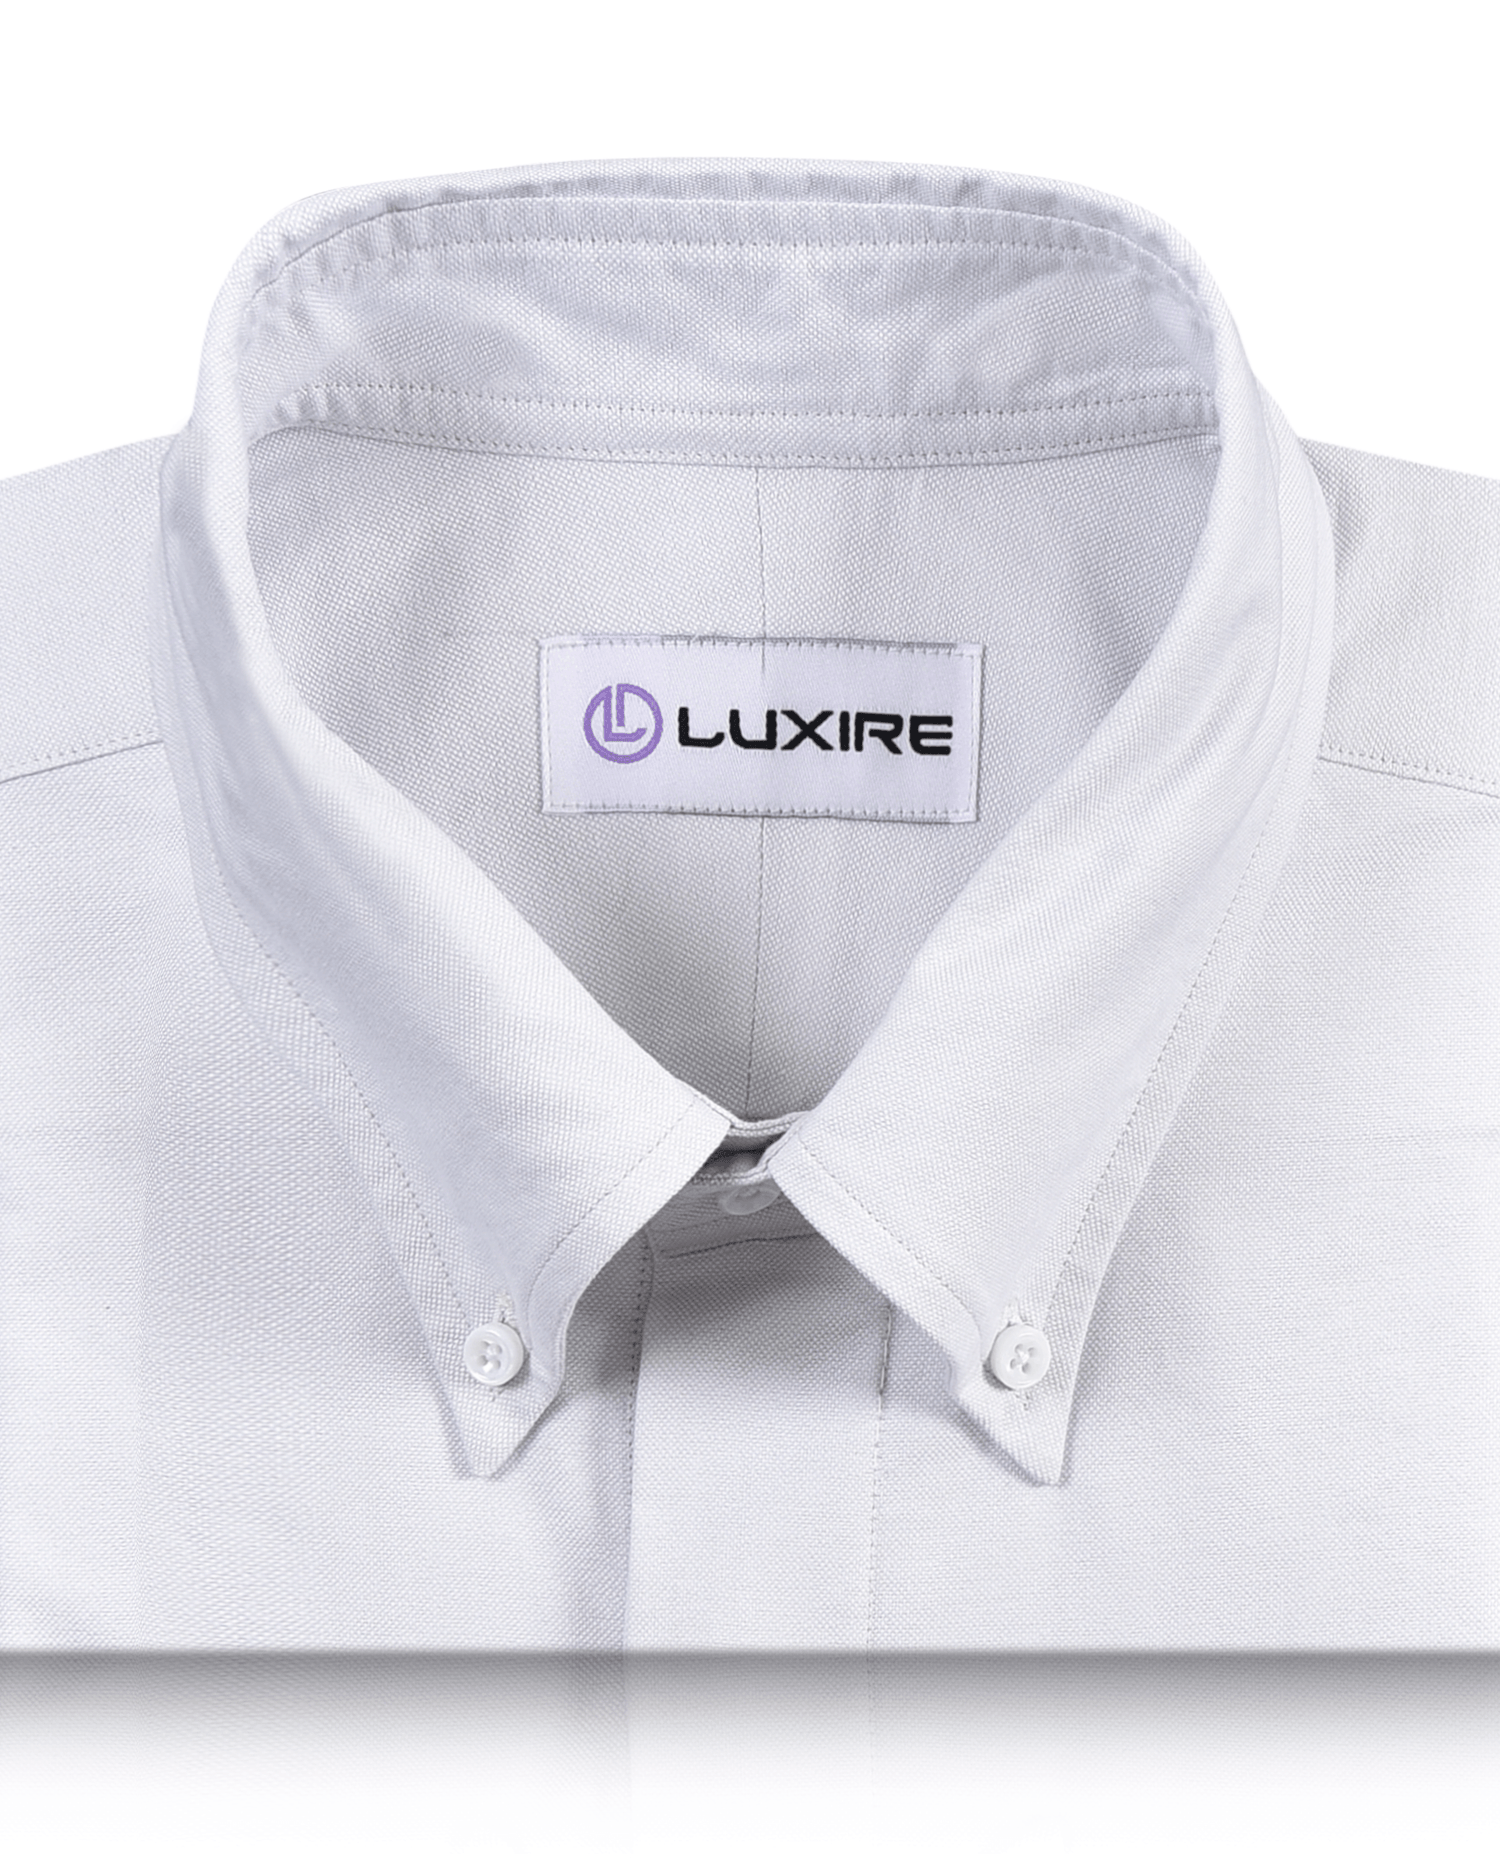 Collar of the custom oxford shirt for men by Luxire in milky white